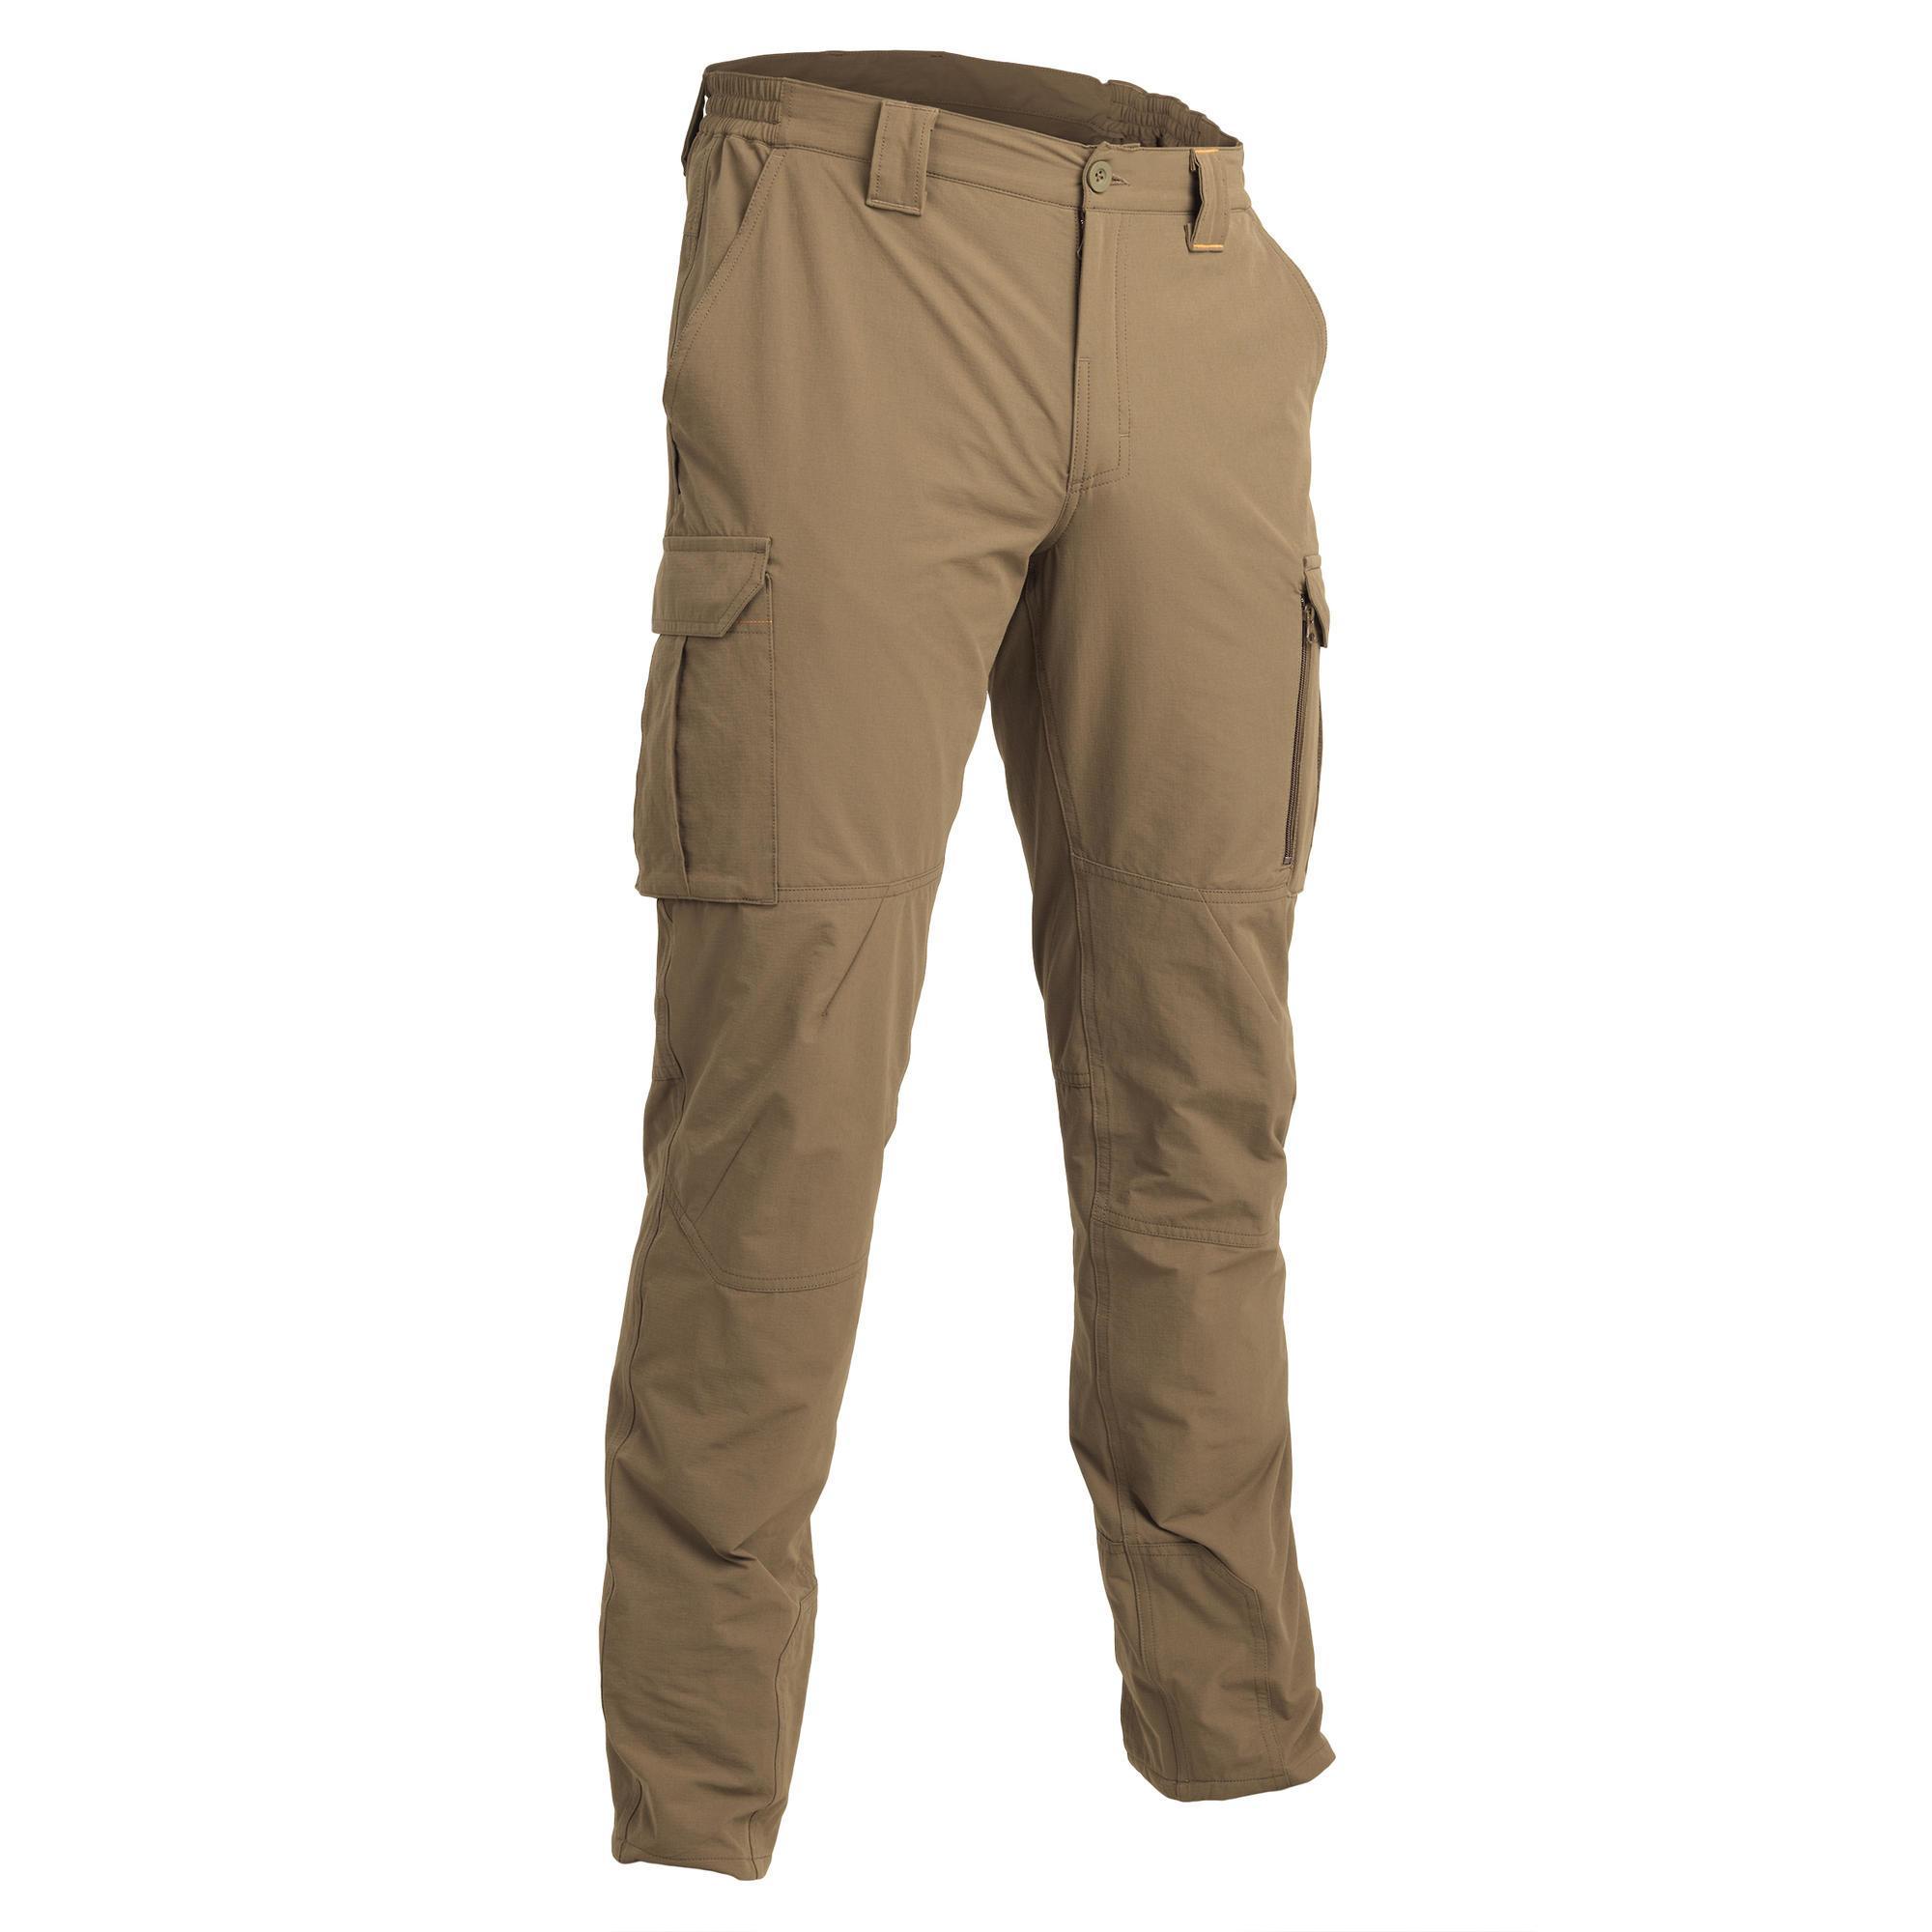 500 Lightweight, breathable hunting trousers SOLOGNAC - Decathlon